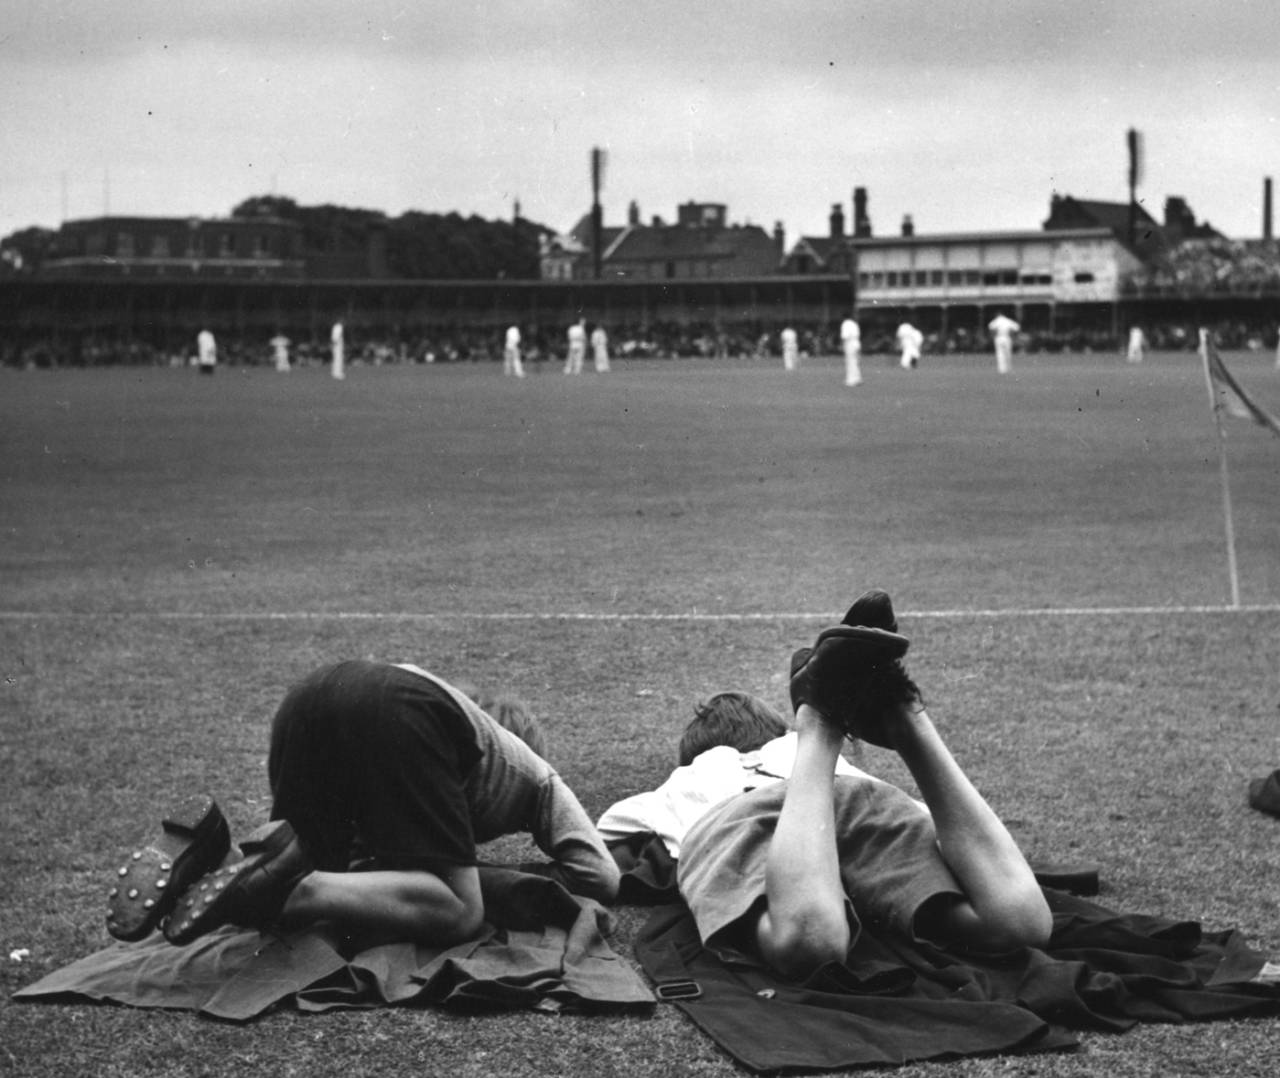 There's plenty of time to indulge in other pleasurable activities while watching cricket&nbsp;&nbsp;&bull;&nbsp;&nbsp;Getty Images